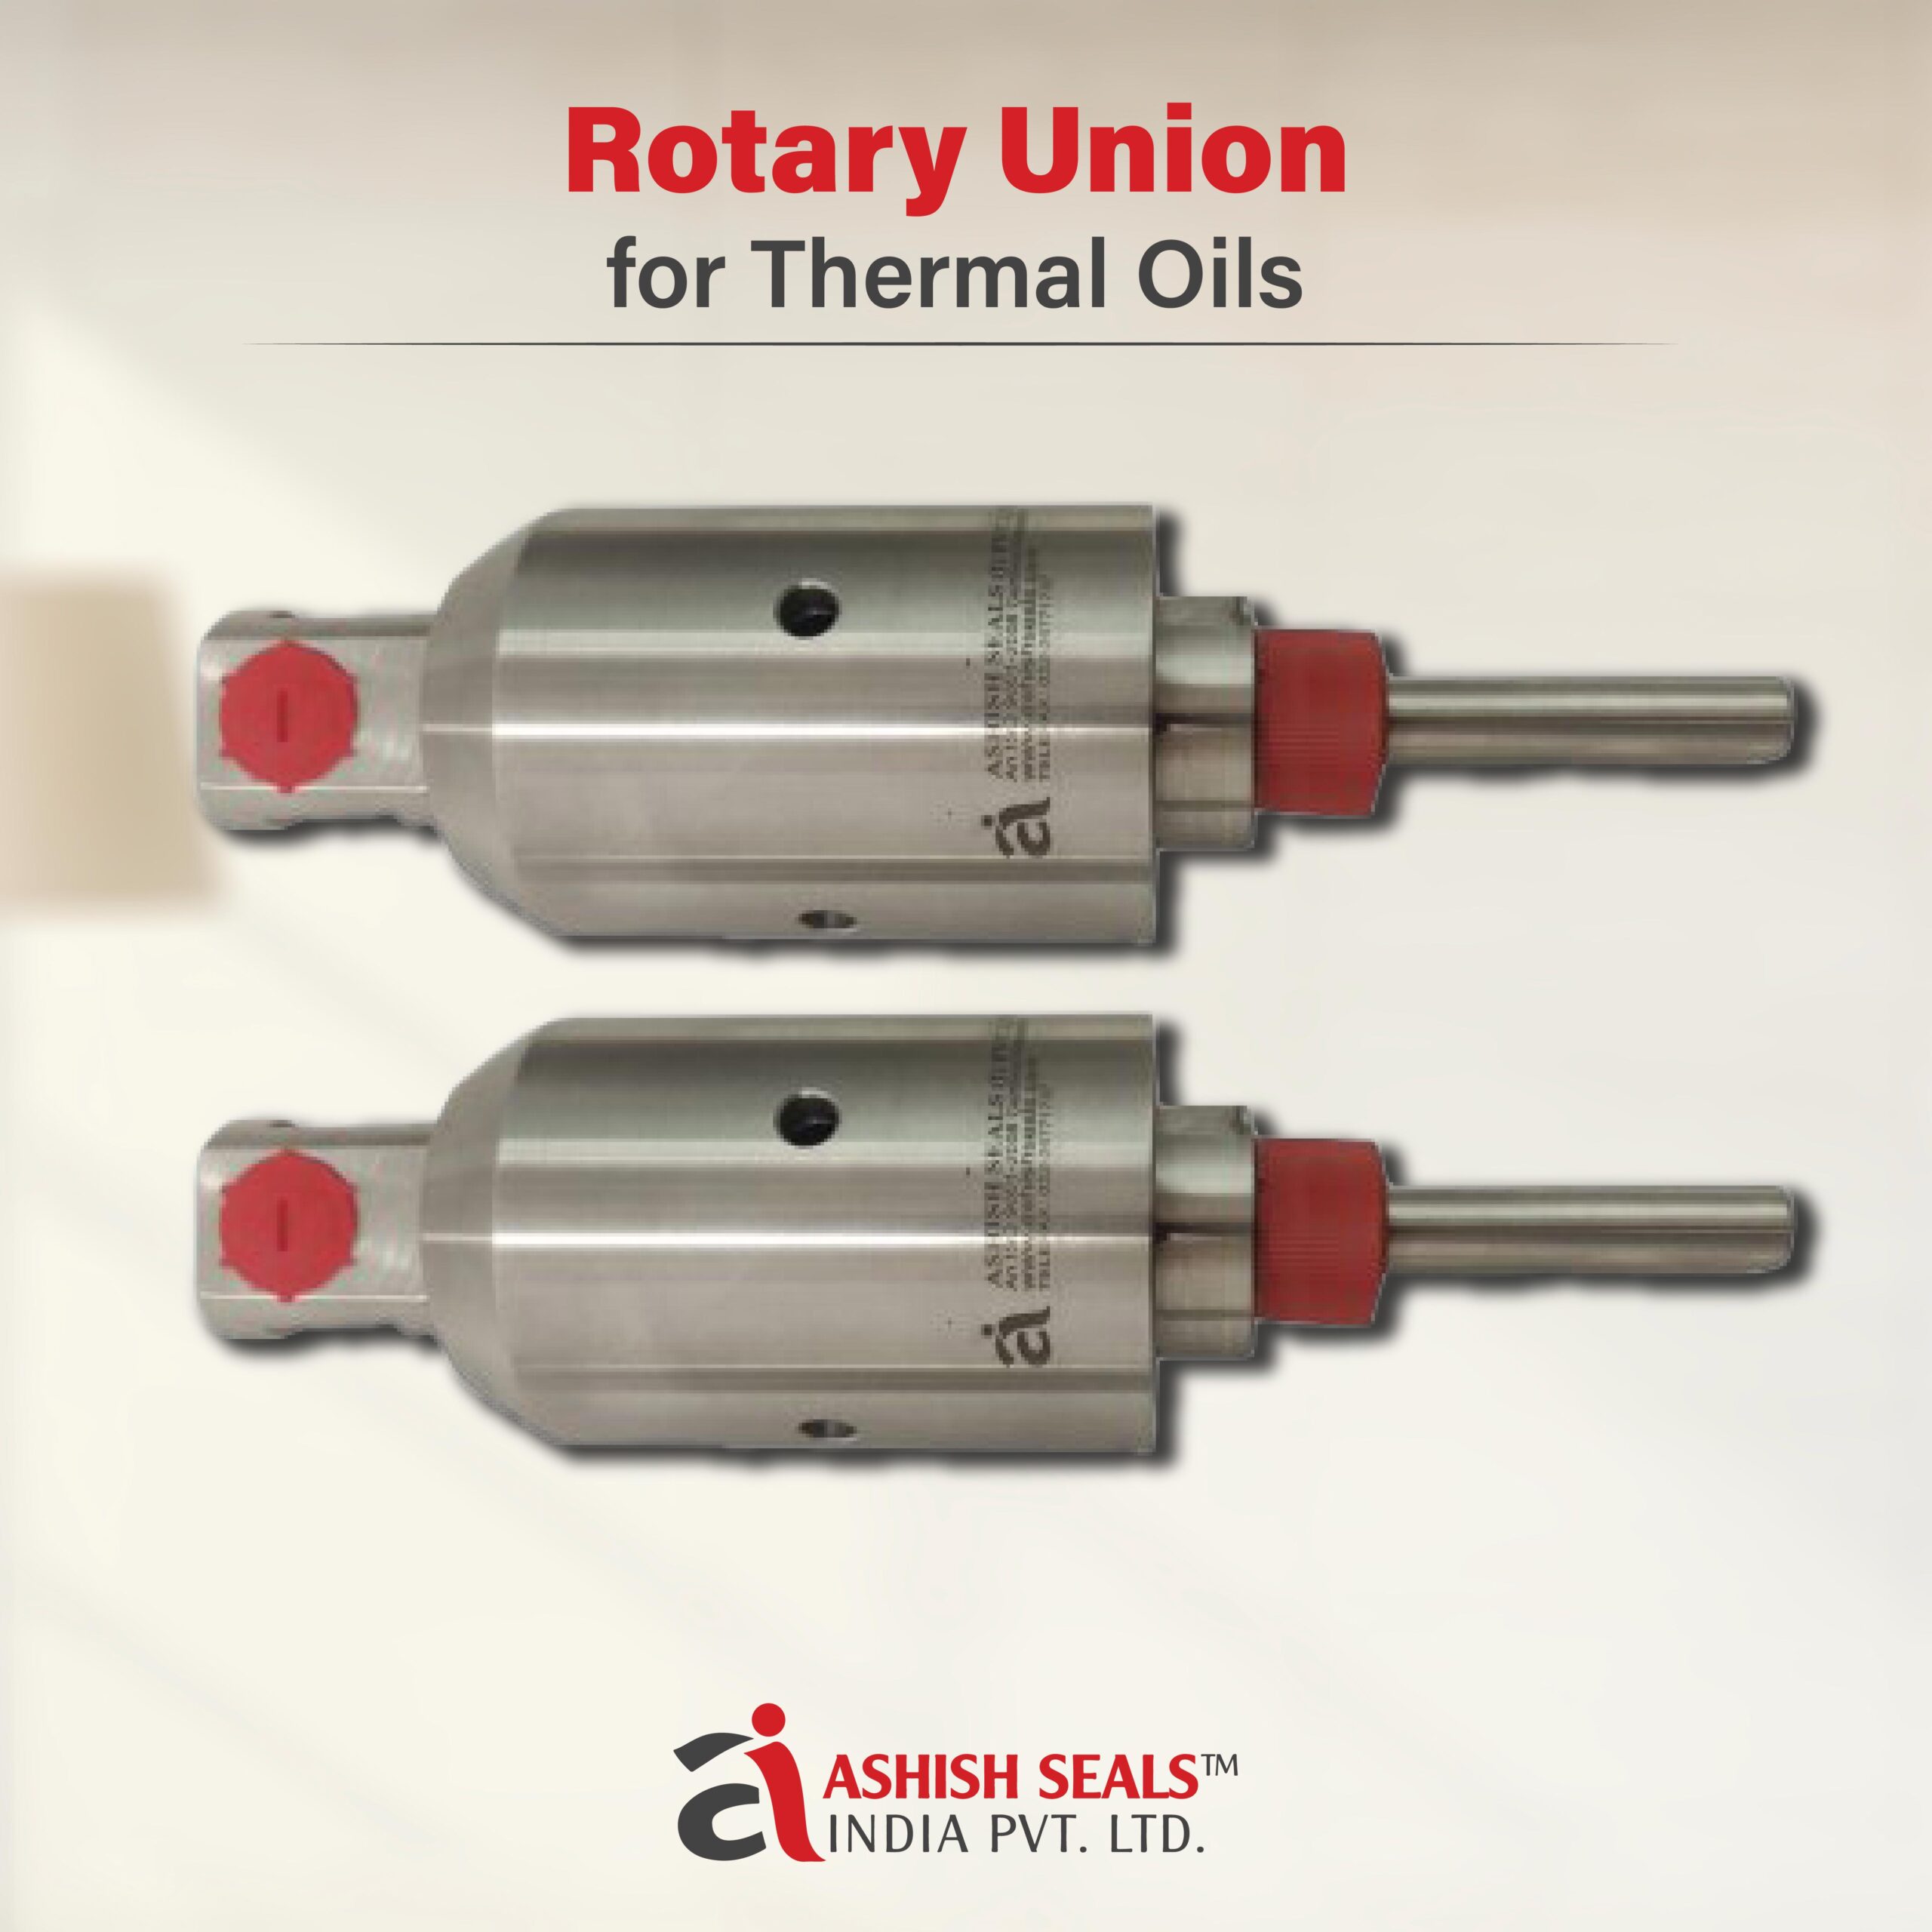 Rotary Unions for Thermal Oils